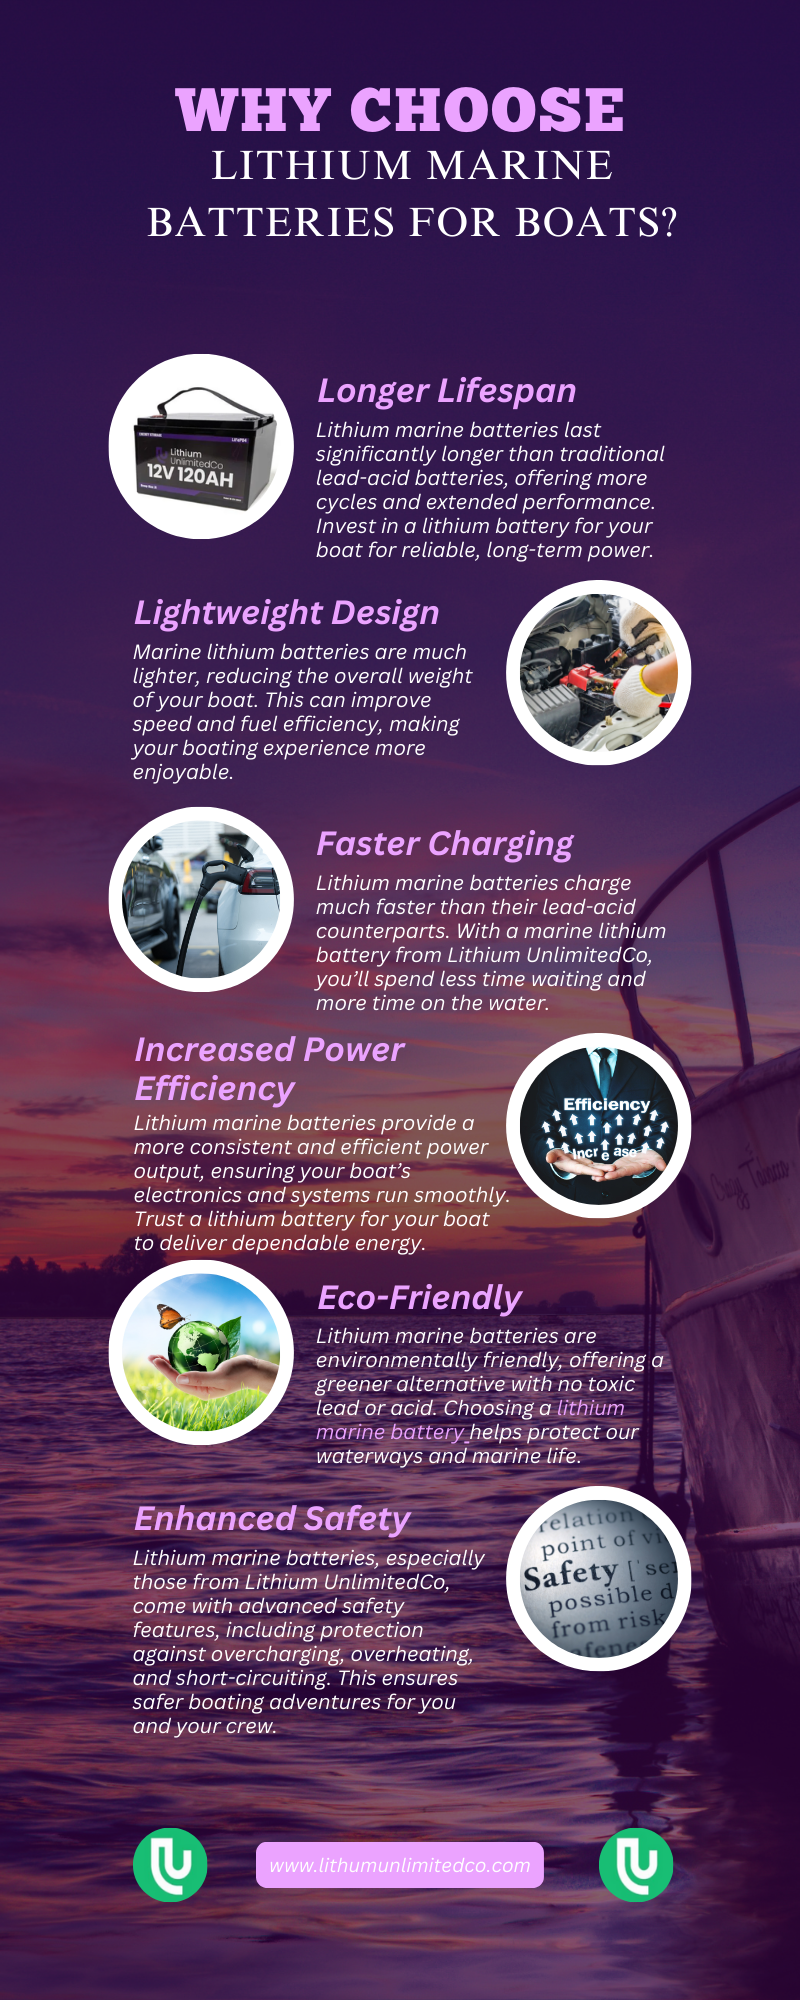 Why Choose Lithium Marine Batteries for Boats